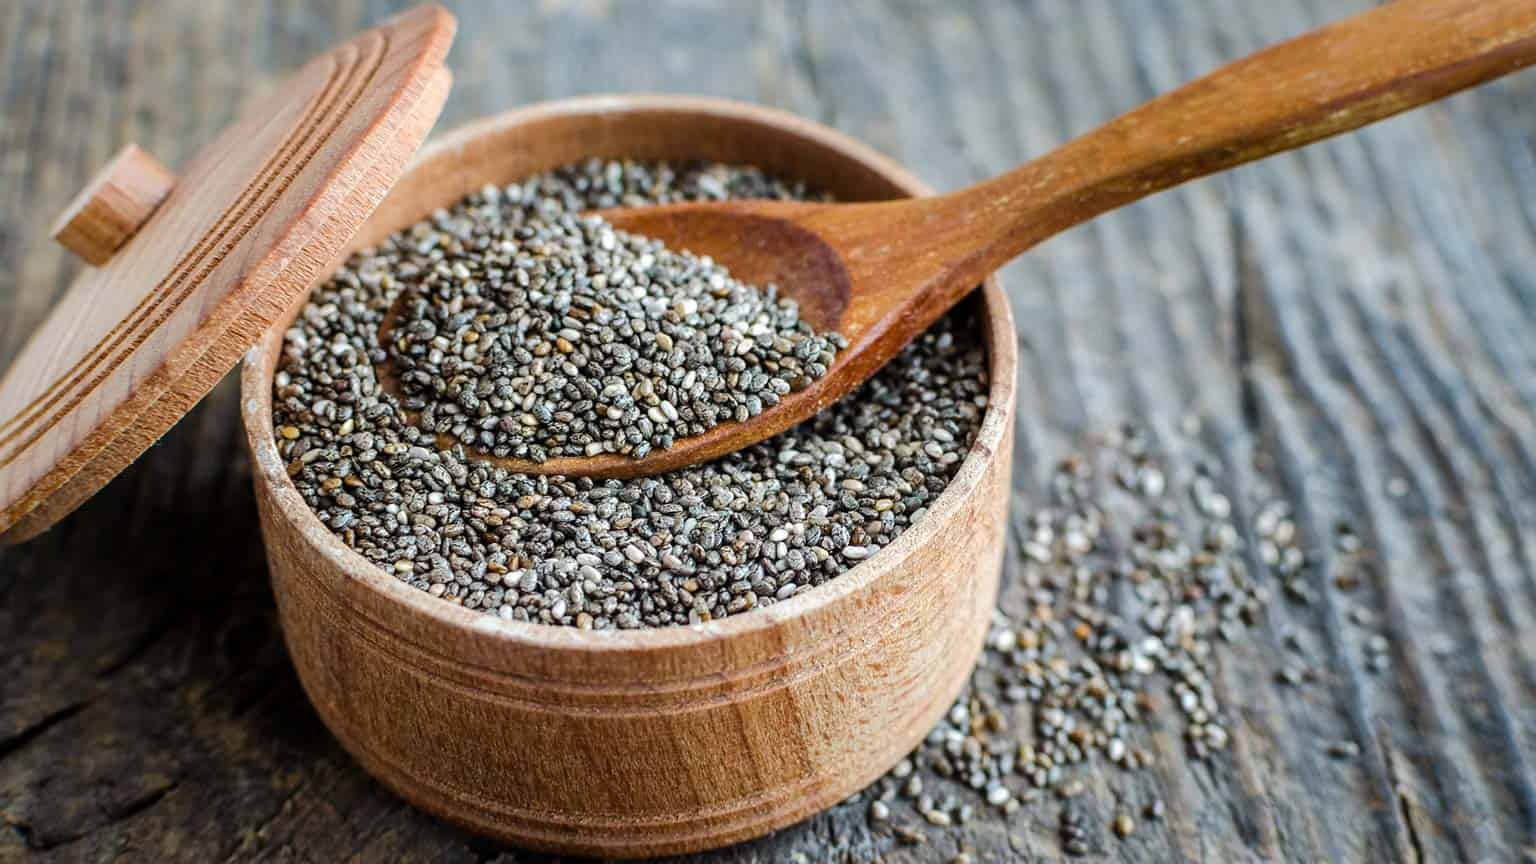 How to include magic seeds in your daily diet